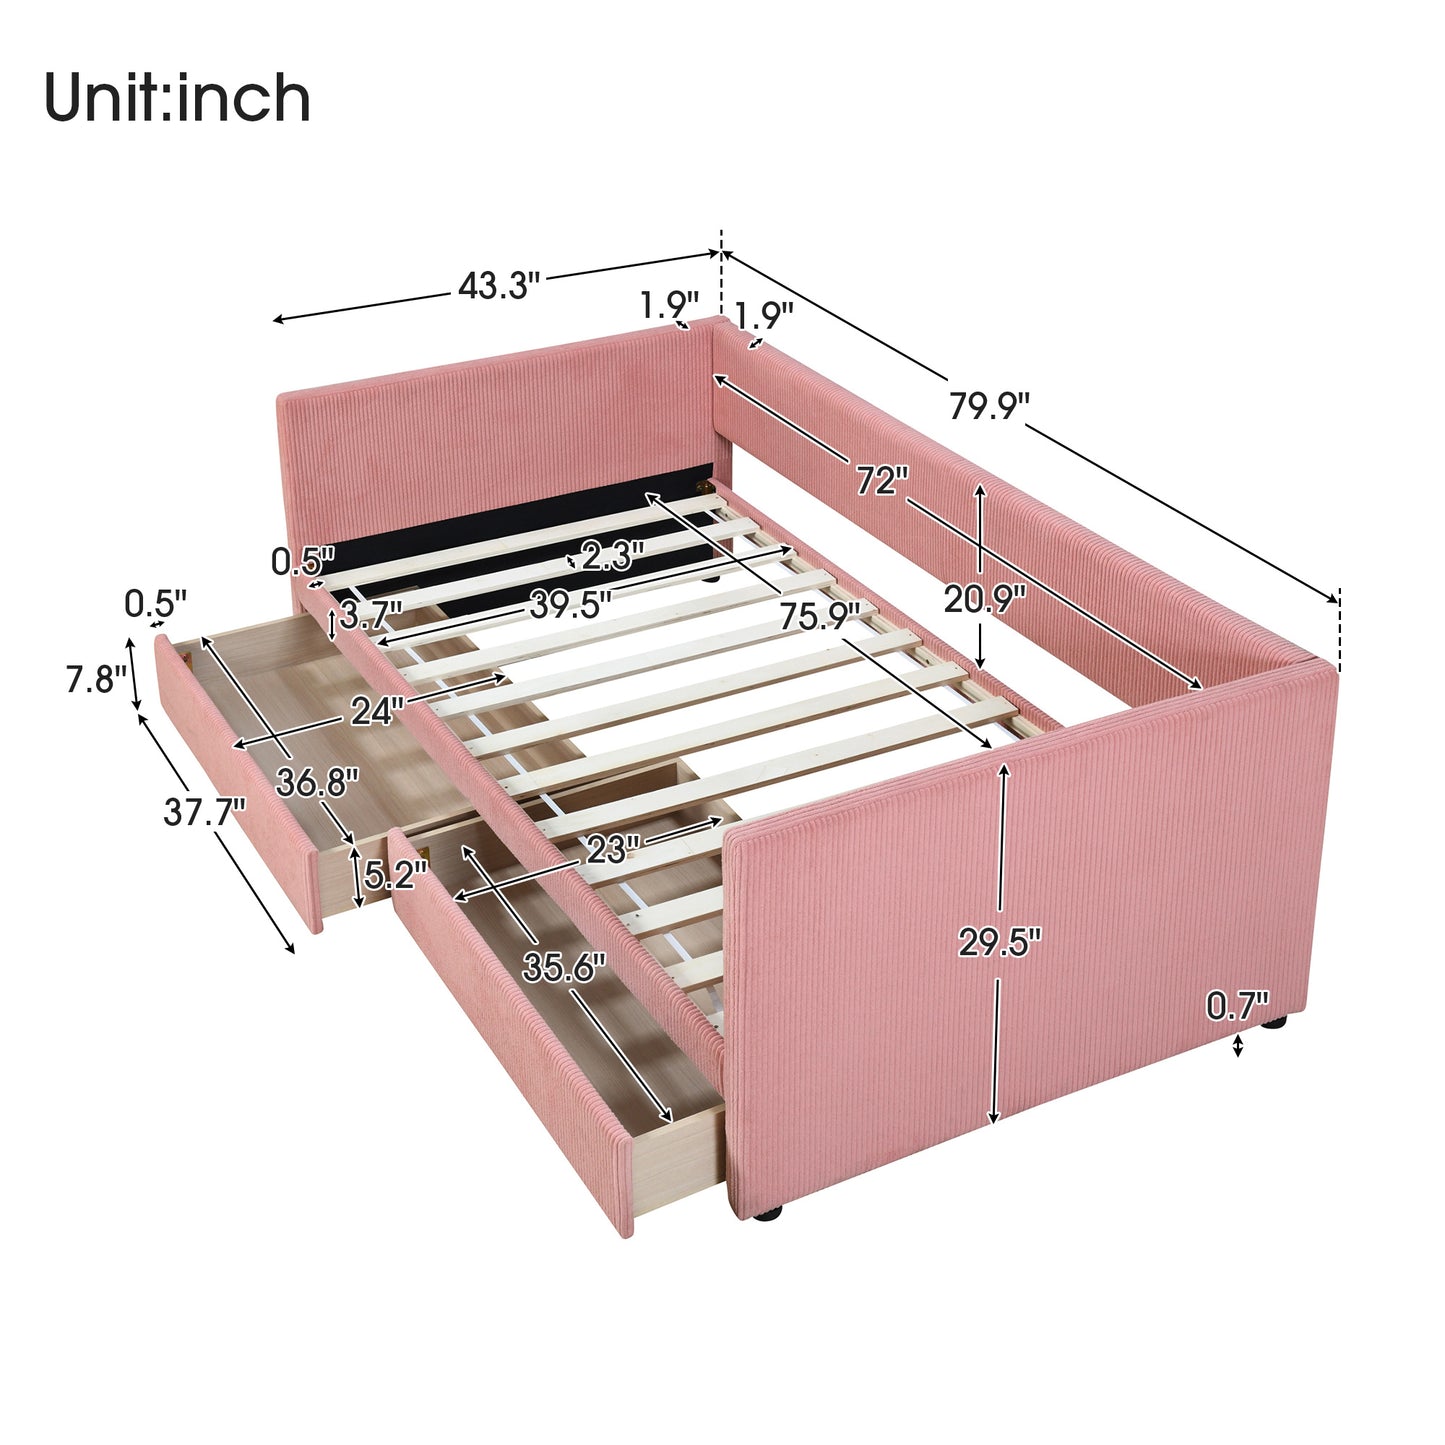 corduroy bed with two drawers and wood slat, pink